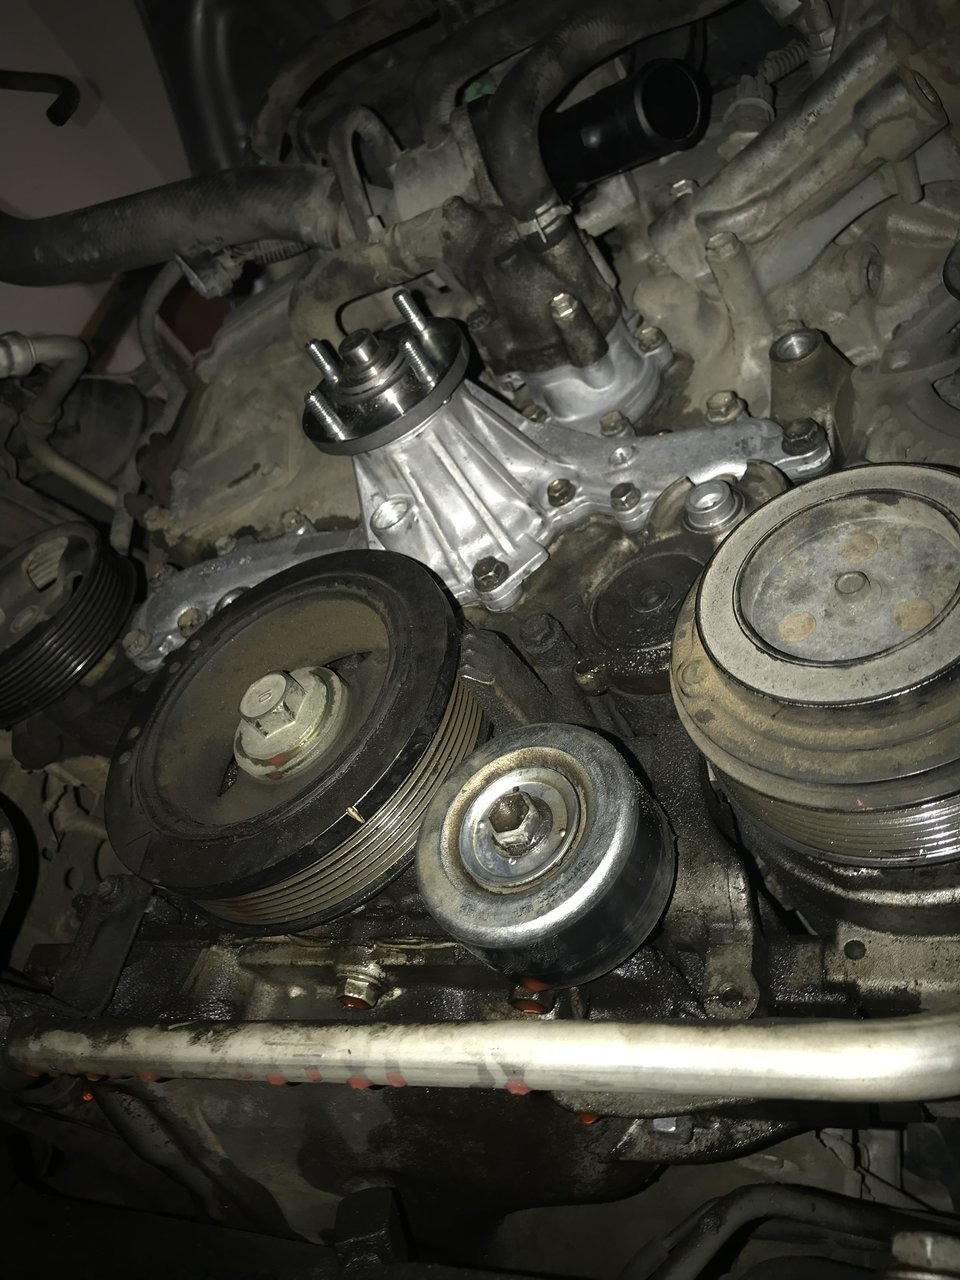 DIY 2nd Gen Water pump replacement | Page 6 | Tacoma World